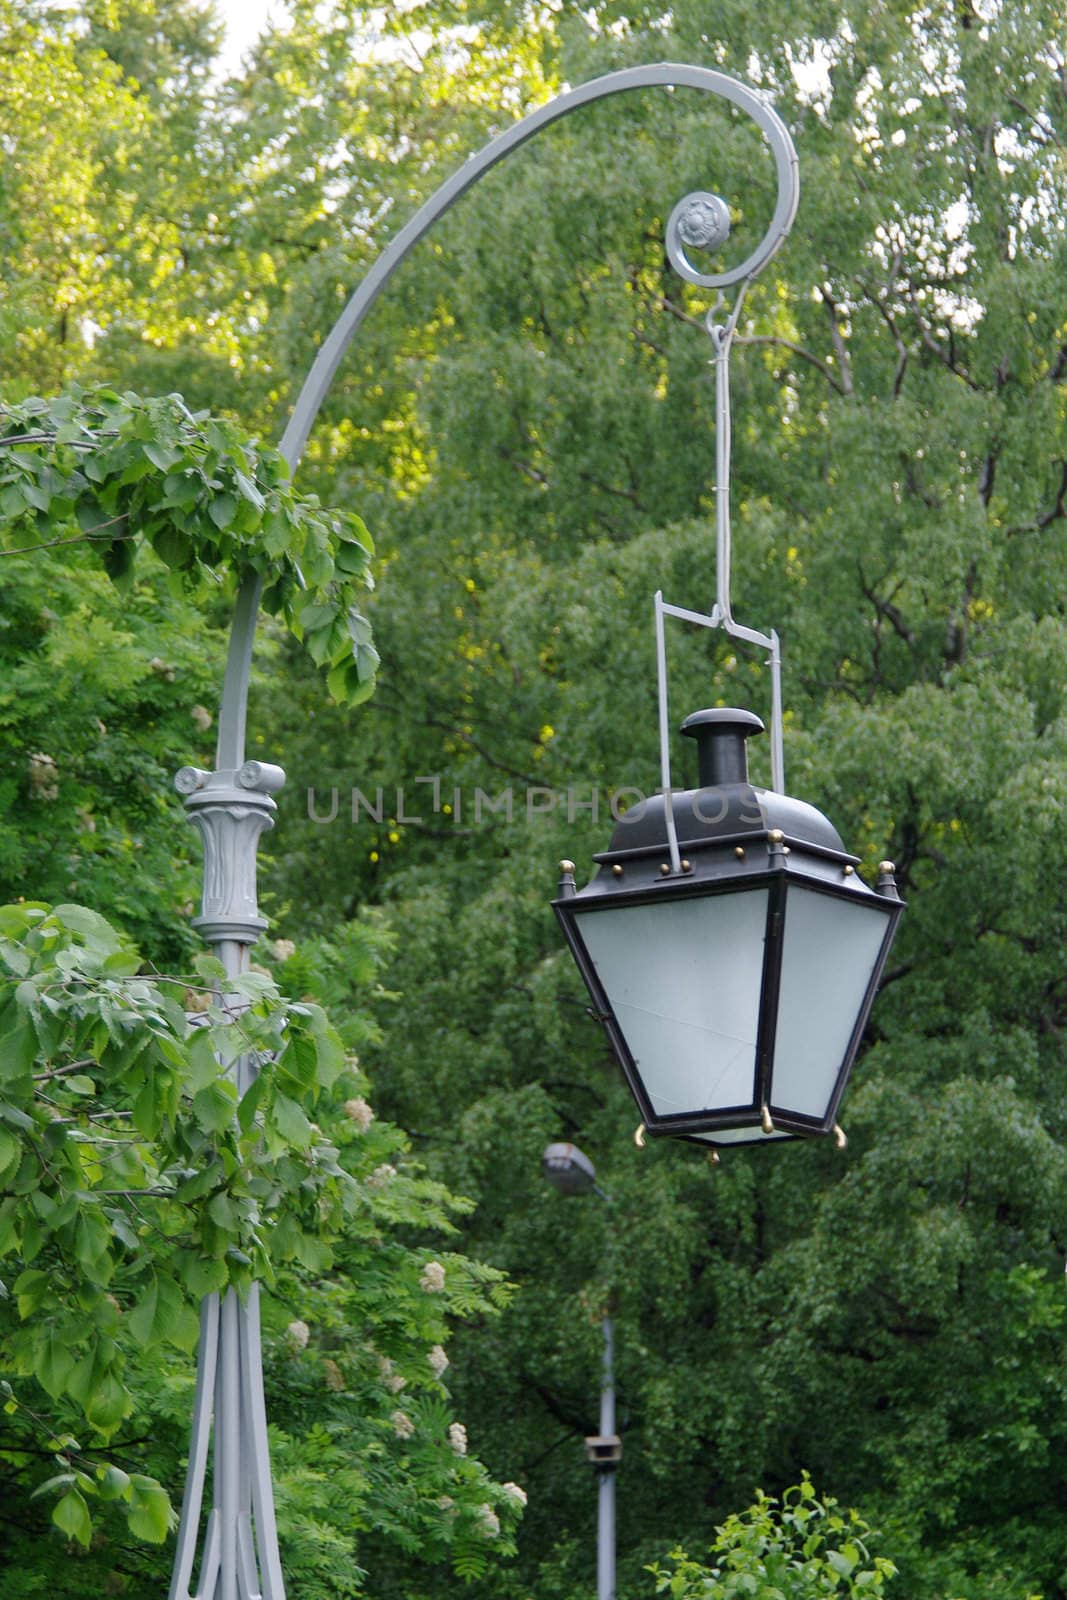 Street-lamp in front of the trees in the park on a sunny day